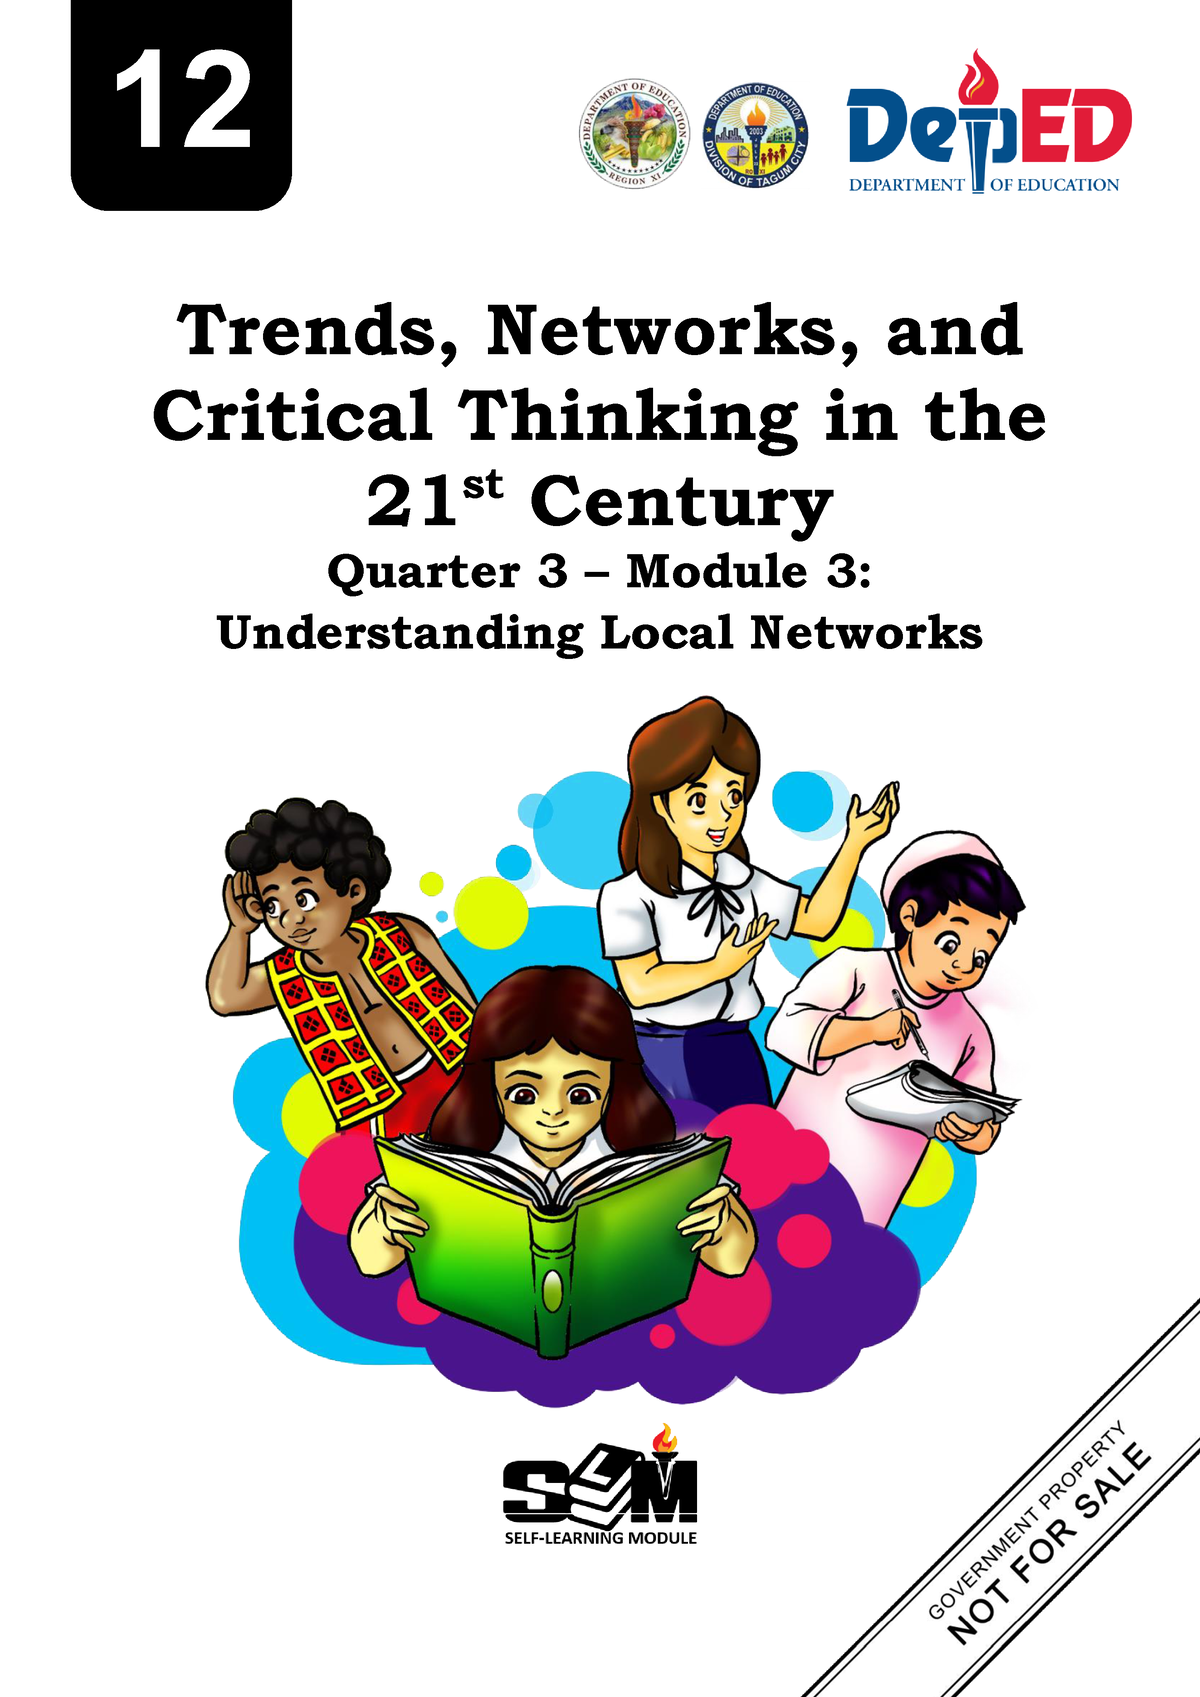 trends networks and critical thinking quarter 1 module 4